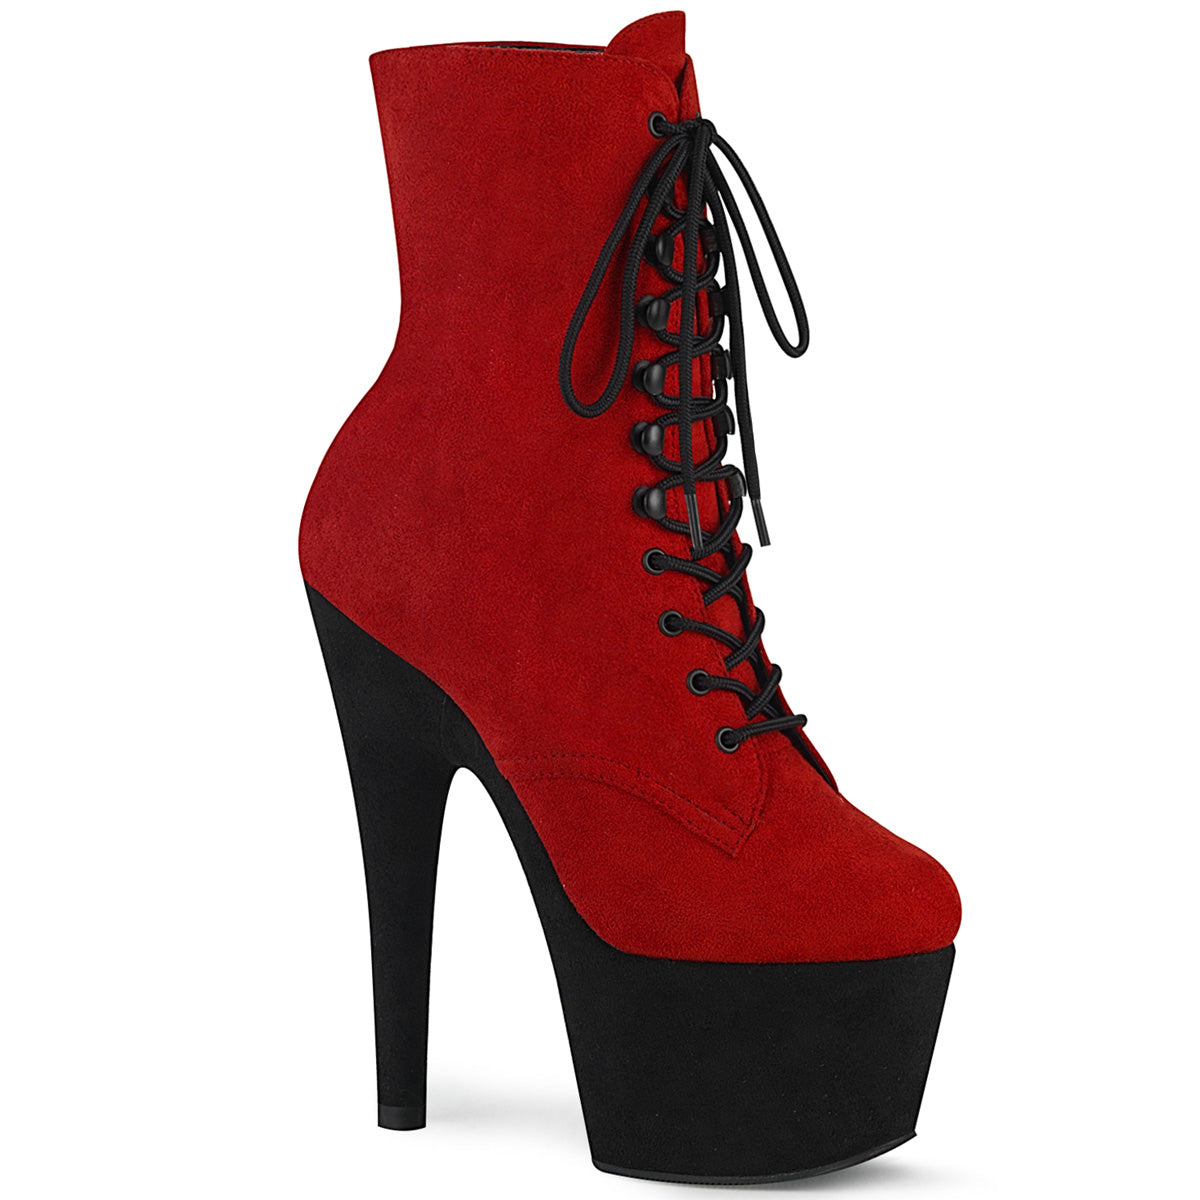 ADORE-1020FSTT Pleaser 7" Heel Red Exotic Dancing Ankle Boot-Pleaser- Sexy Shoes